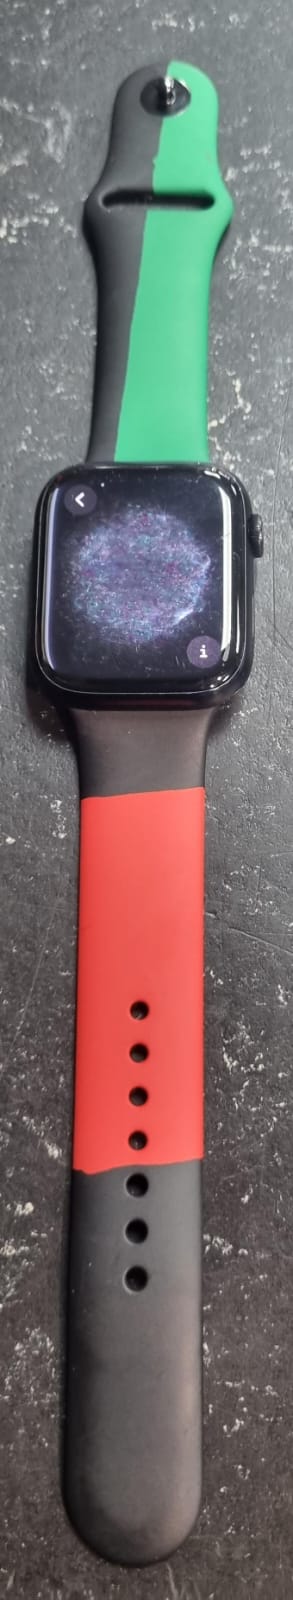 Apple Watch Series 7 - 45mm - Wi-Fi & Cellular - With Charger - No Box